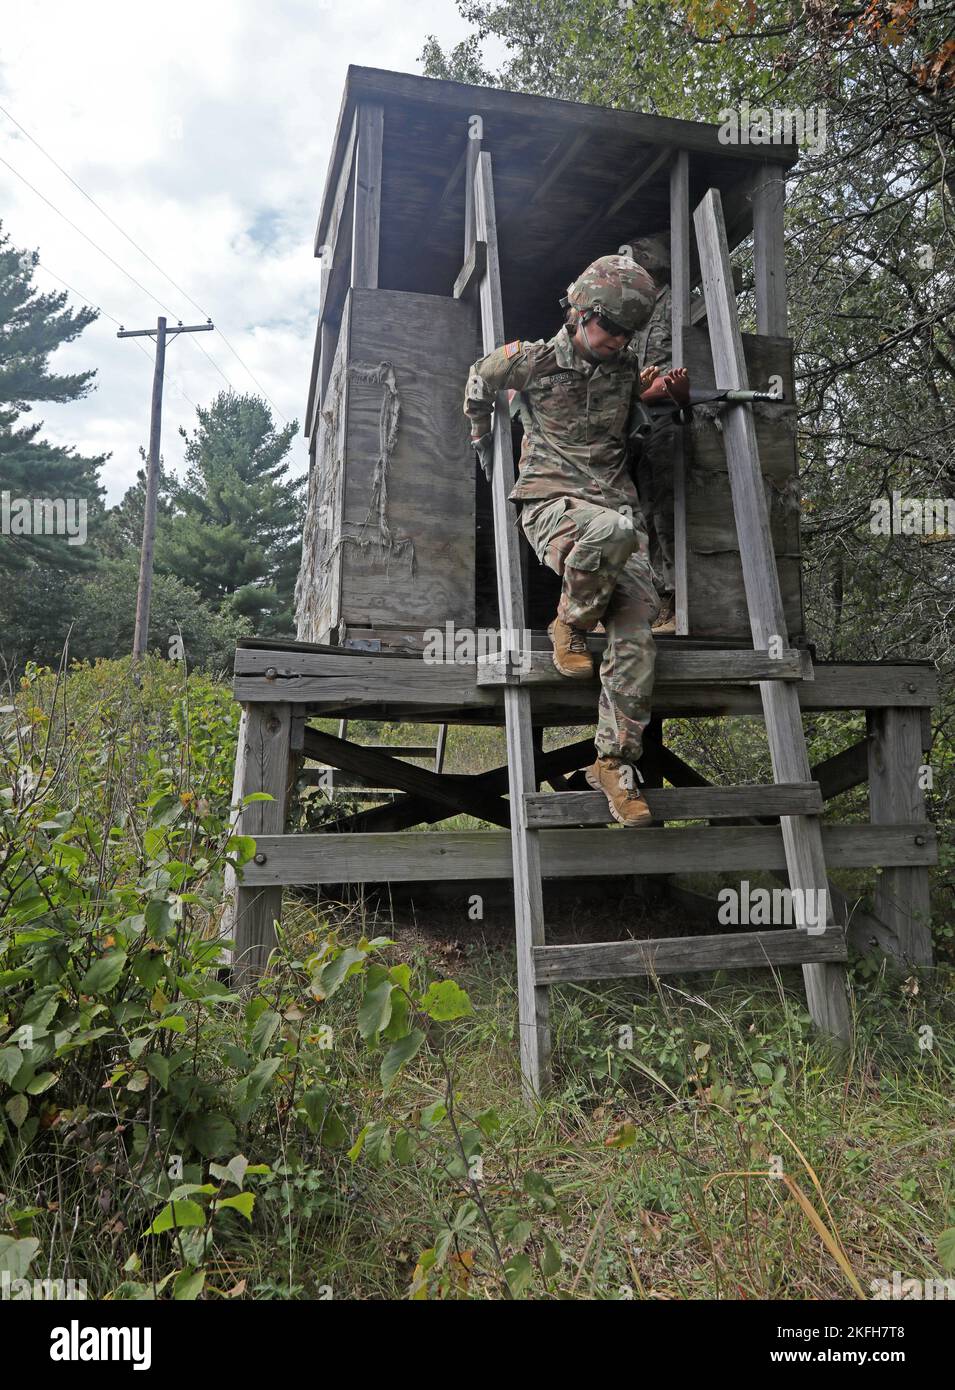 U.S. Army Reserve Spc. Ashley Carson, assigned to the 452nd Combat Support Hospital, 807th Medical Command (Deployment Support) based in Milwaukee, grabs a guard shack ladder rail as she carefully steps on the ladder rungs while holding a collapsible litter carrying a 'casualty' held by two other Soldiers during a litter obstacle course on Fort McCoy, Wis., Sept. 16, 2022. Stock Photo